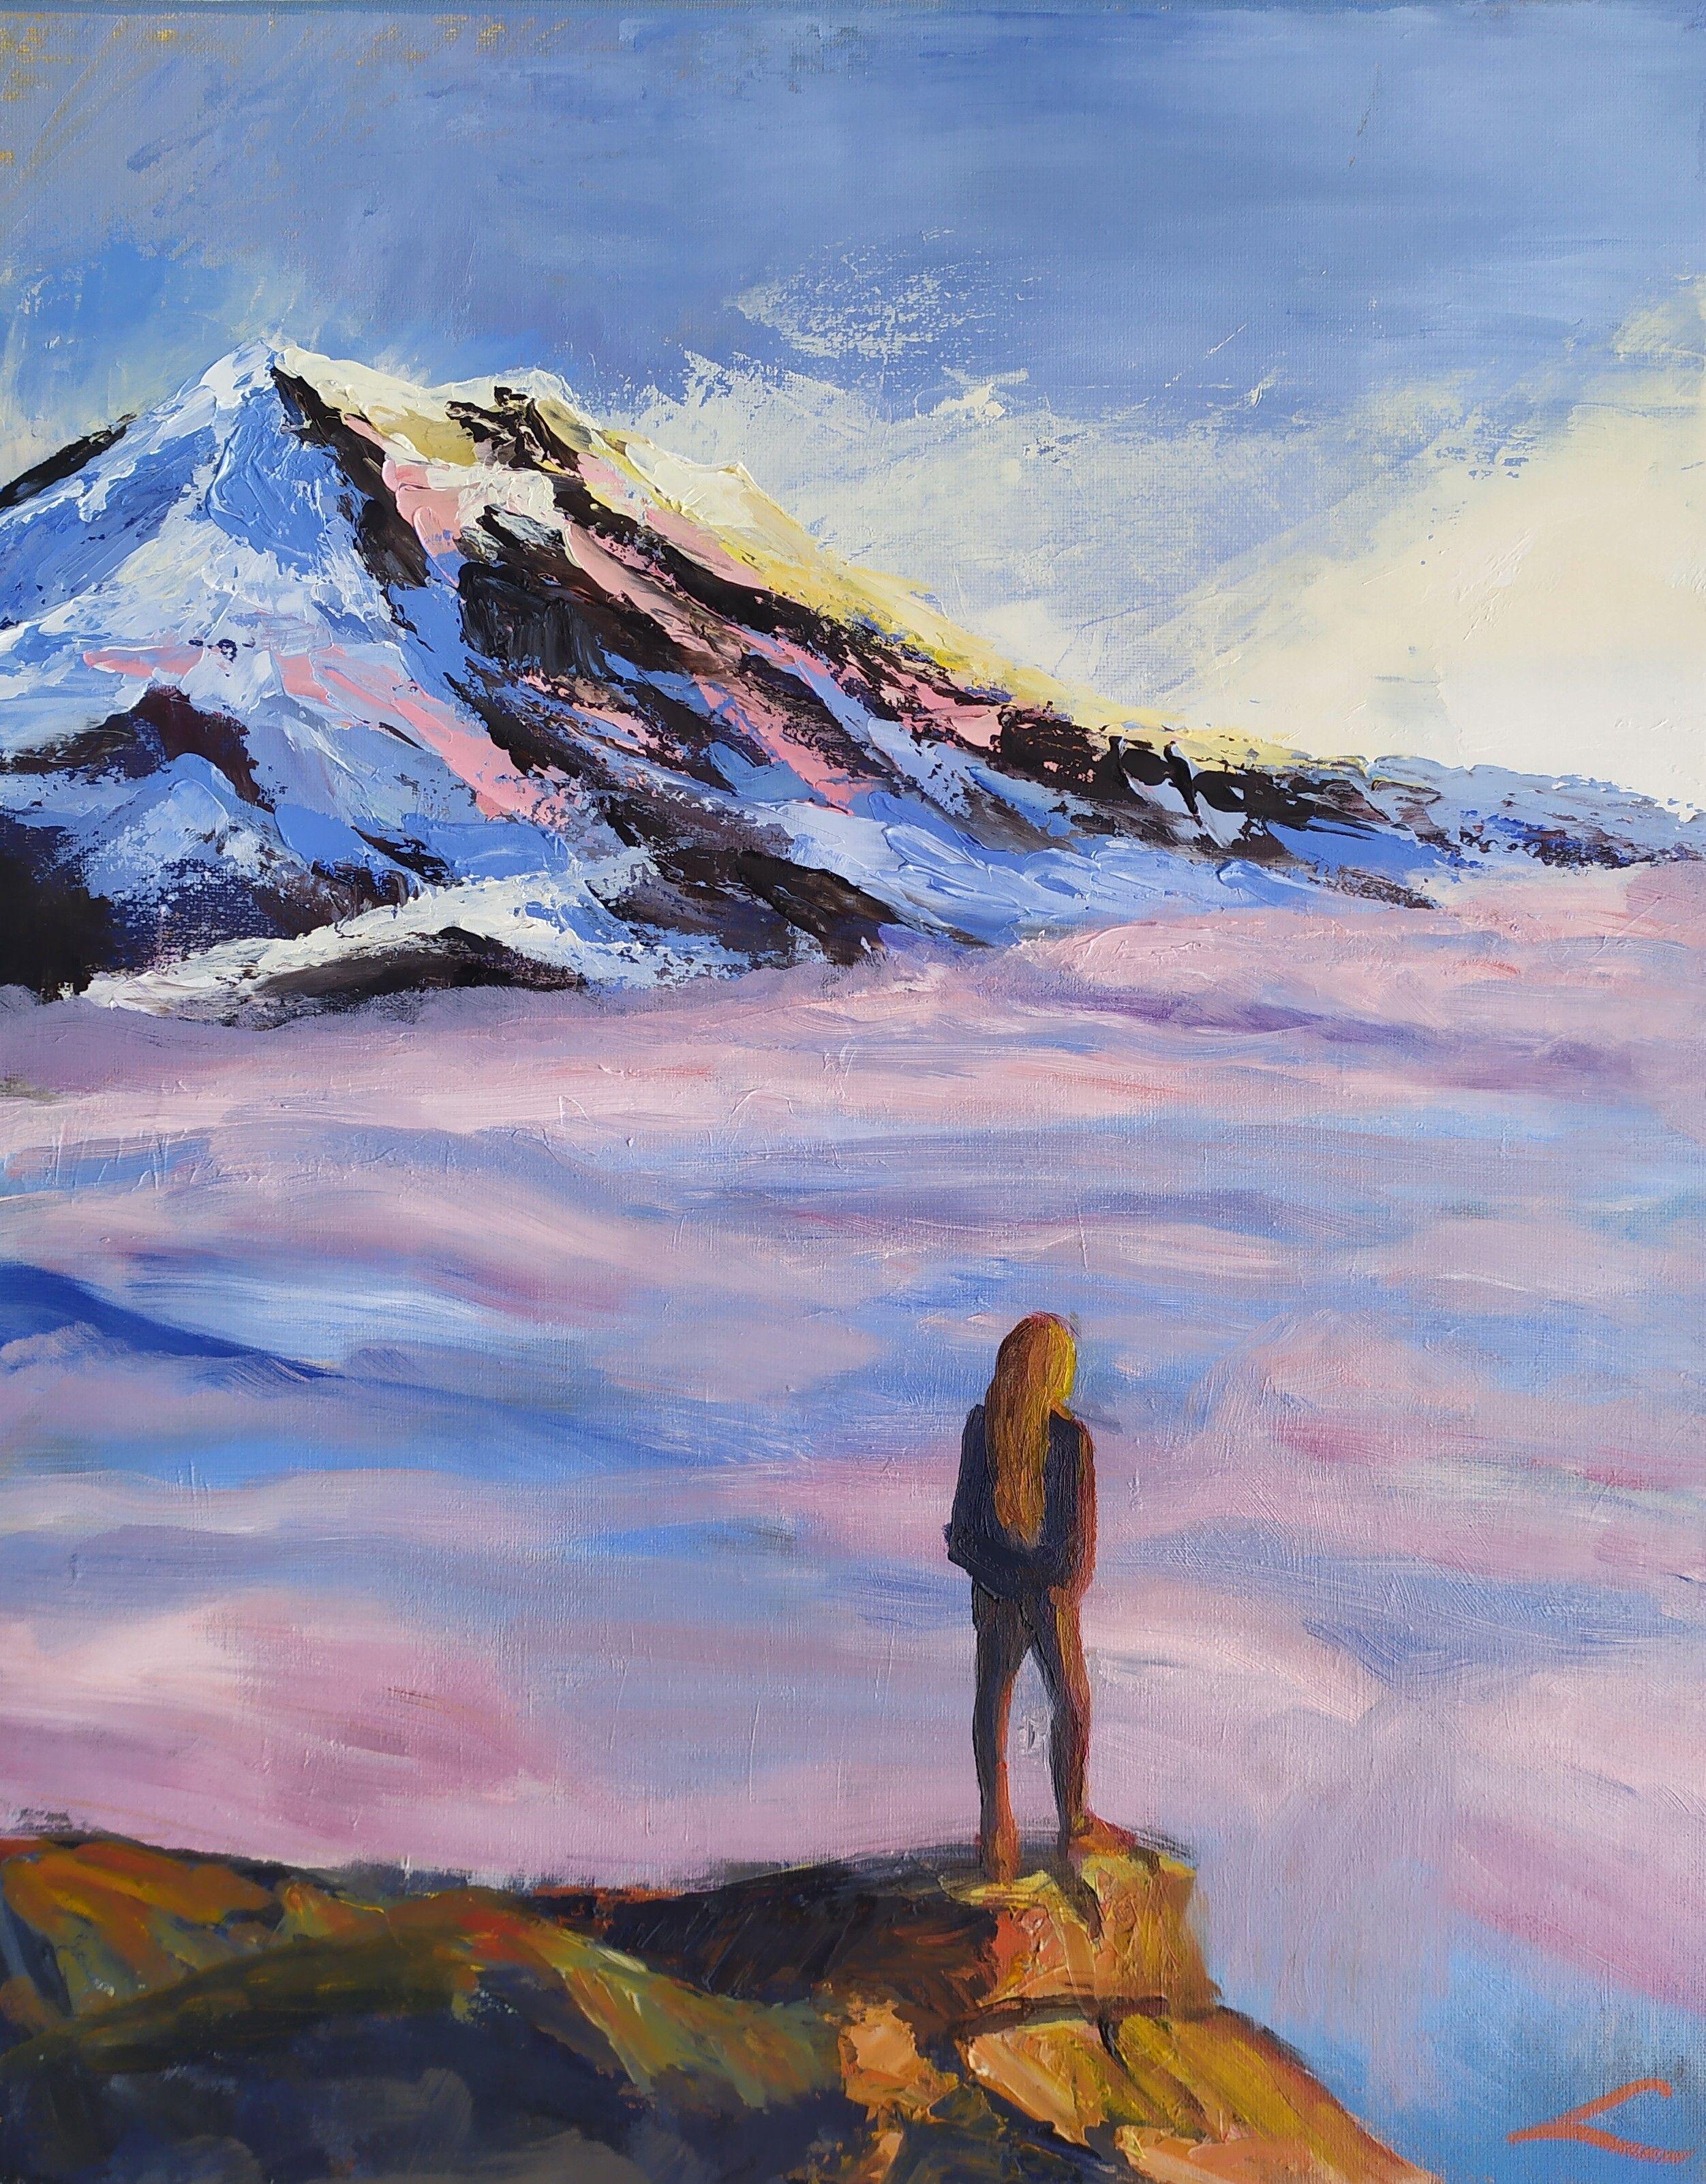 Oil on canvas painting of the mountain landscape with clouds and a figure. :: Painting :: Impressionist :: This piece comes with an official certificate of authenticity signed by the artist :: Ready to Hang: Yes :: Signed: Yes :: Signature Location: